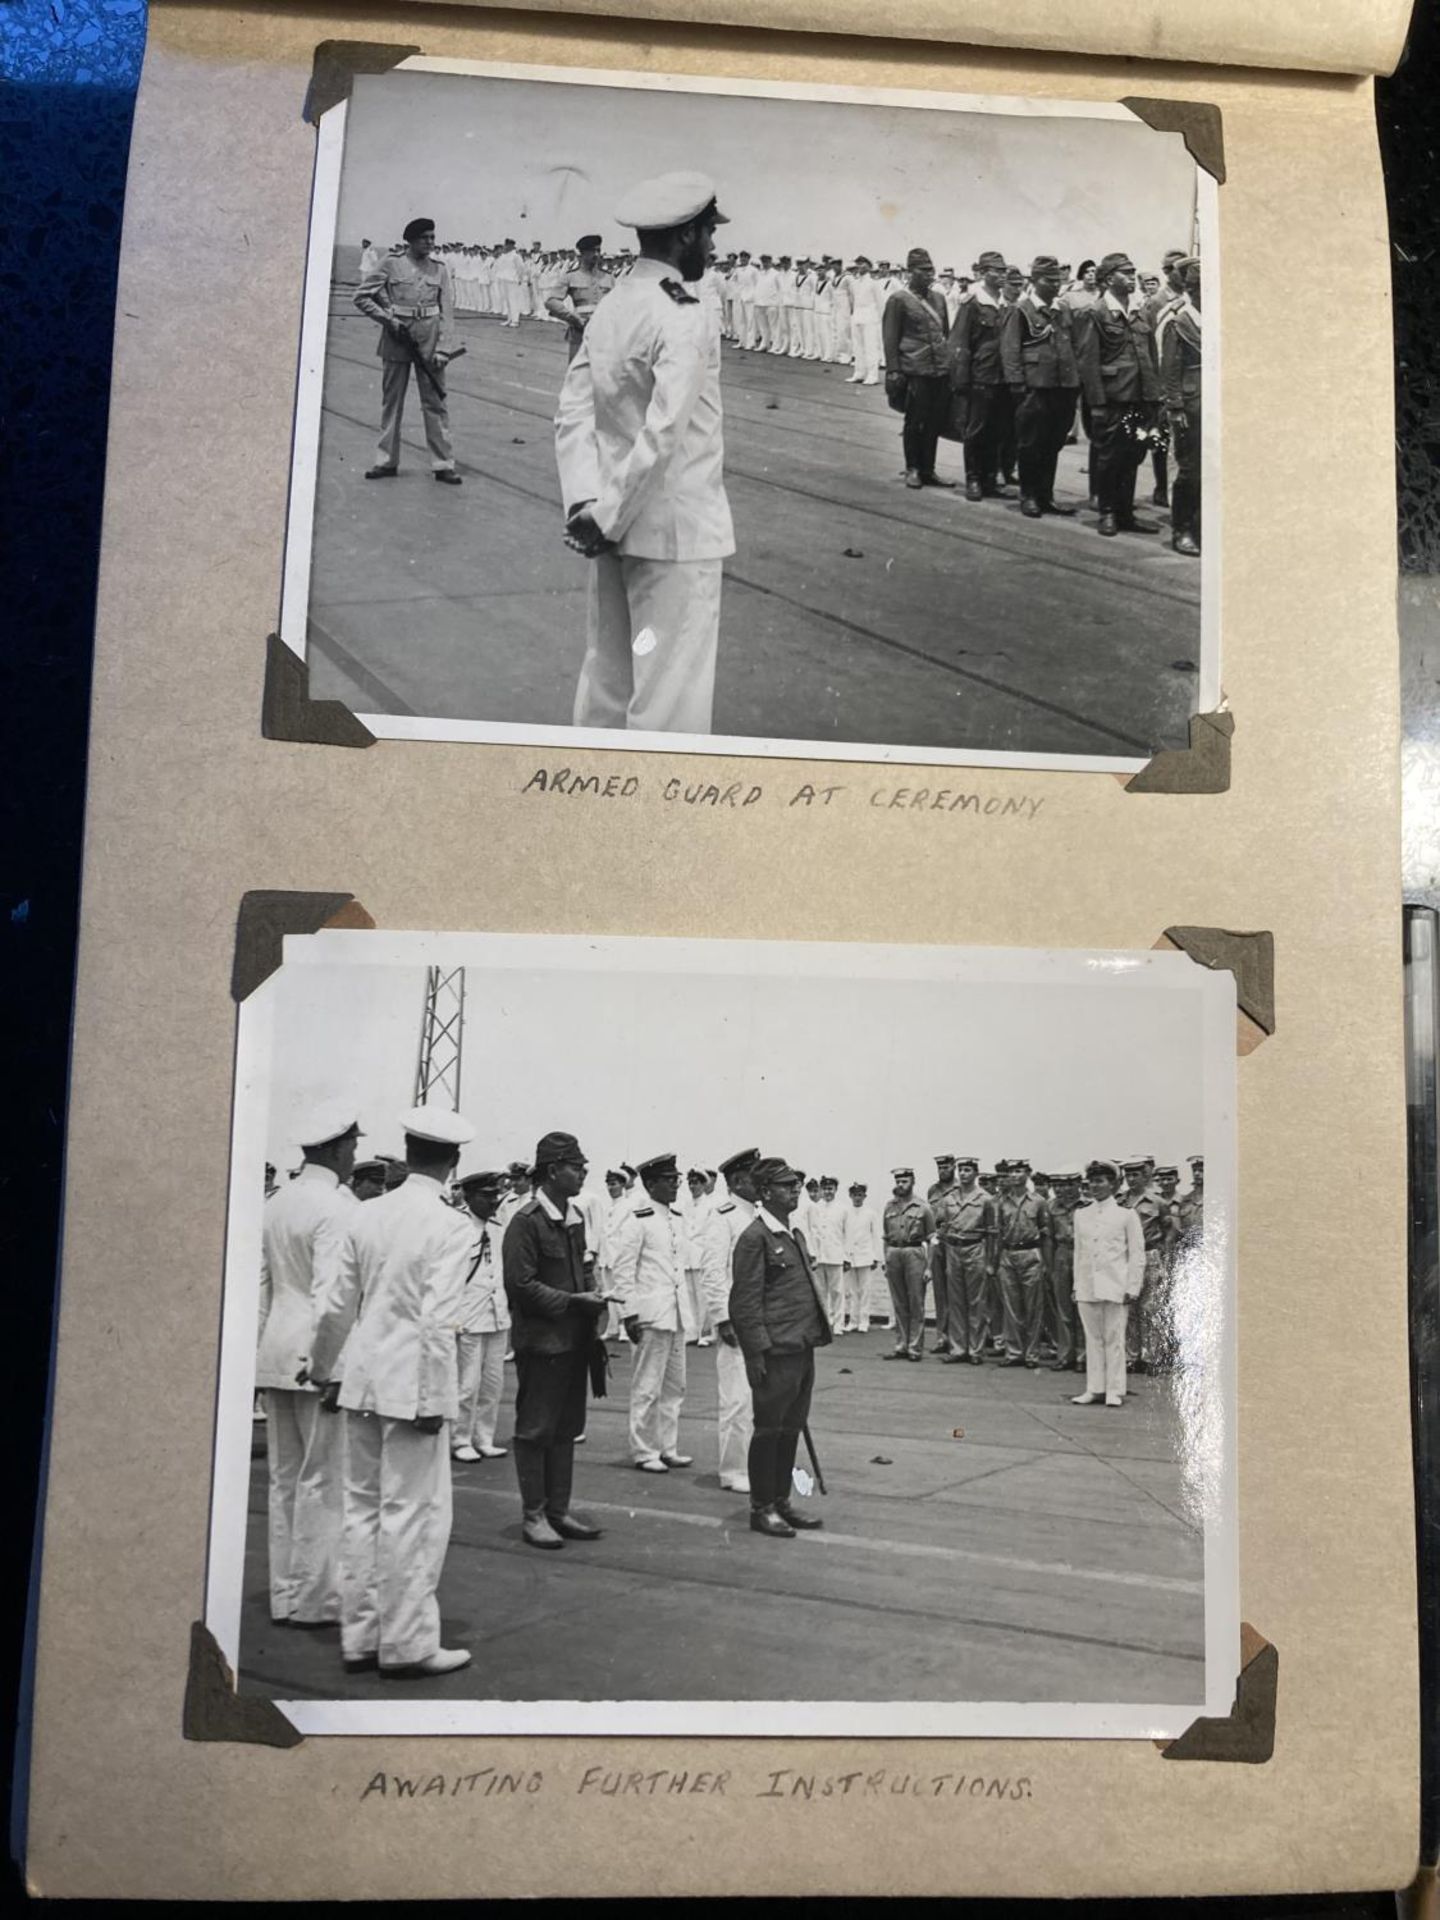 A WORLD WAR II PHOTOGRAPH ALBUM CONTAINING PHOTOGRAPHS OF THE JAPANESE SIGNING OF THE INSTRUMENT - Image 4 of 10